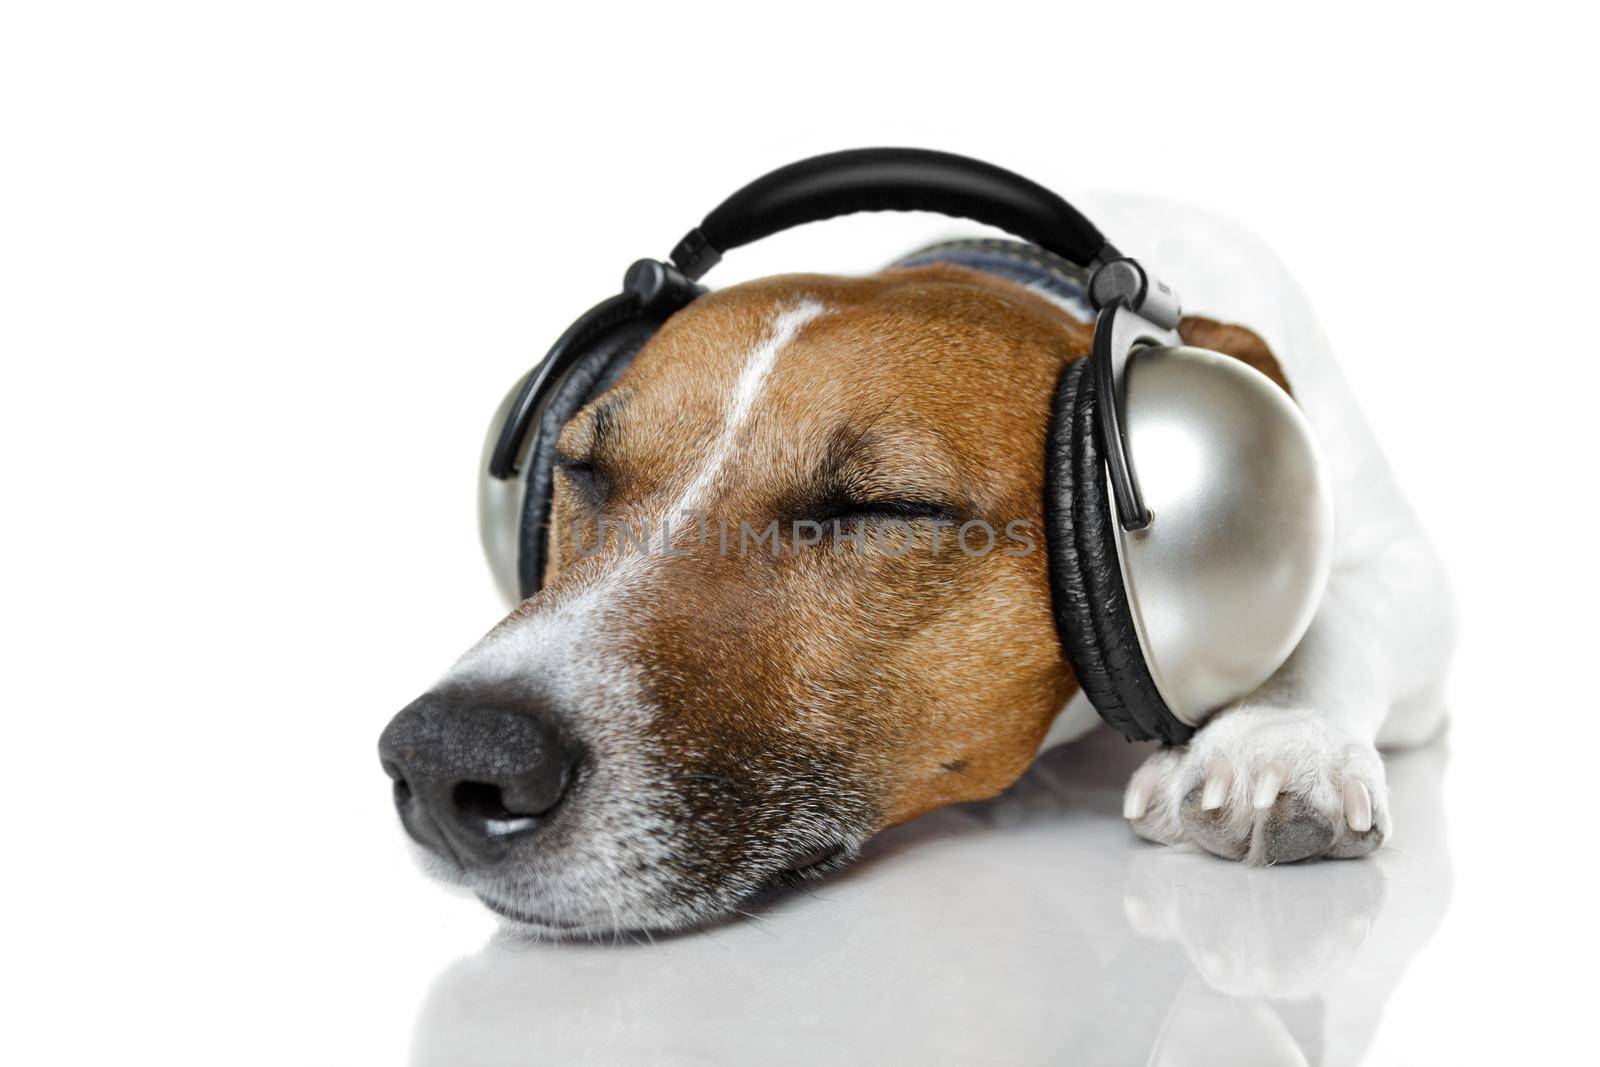 Dog listen to music with a music player by Brosch